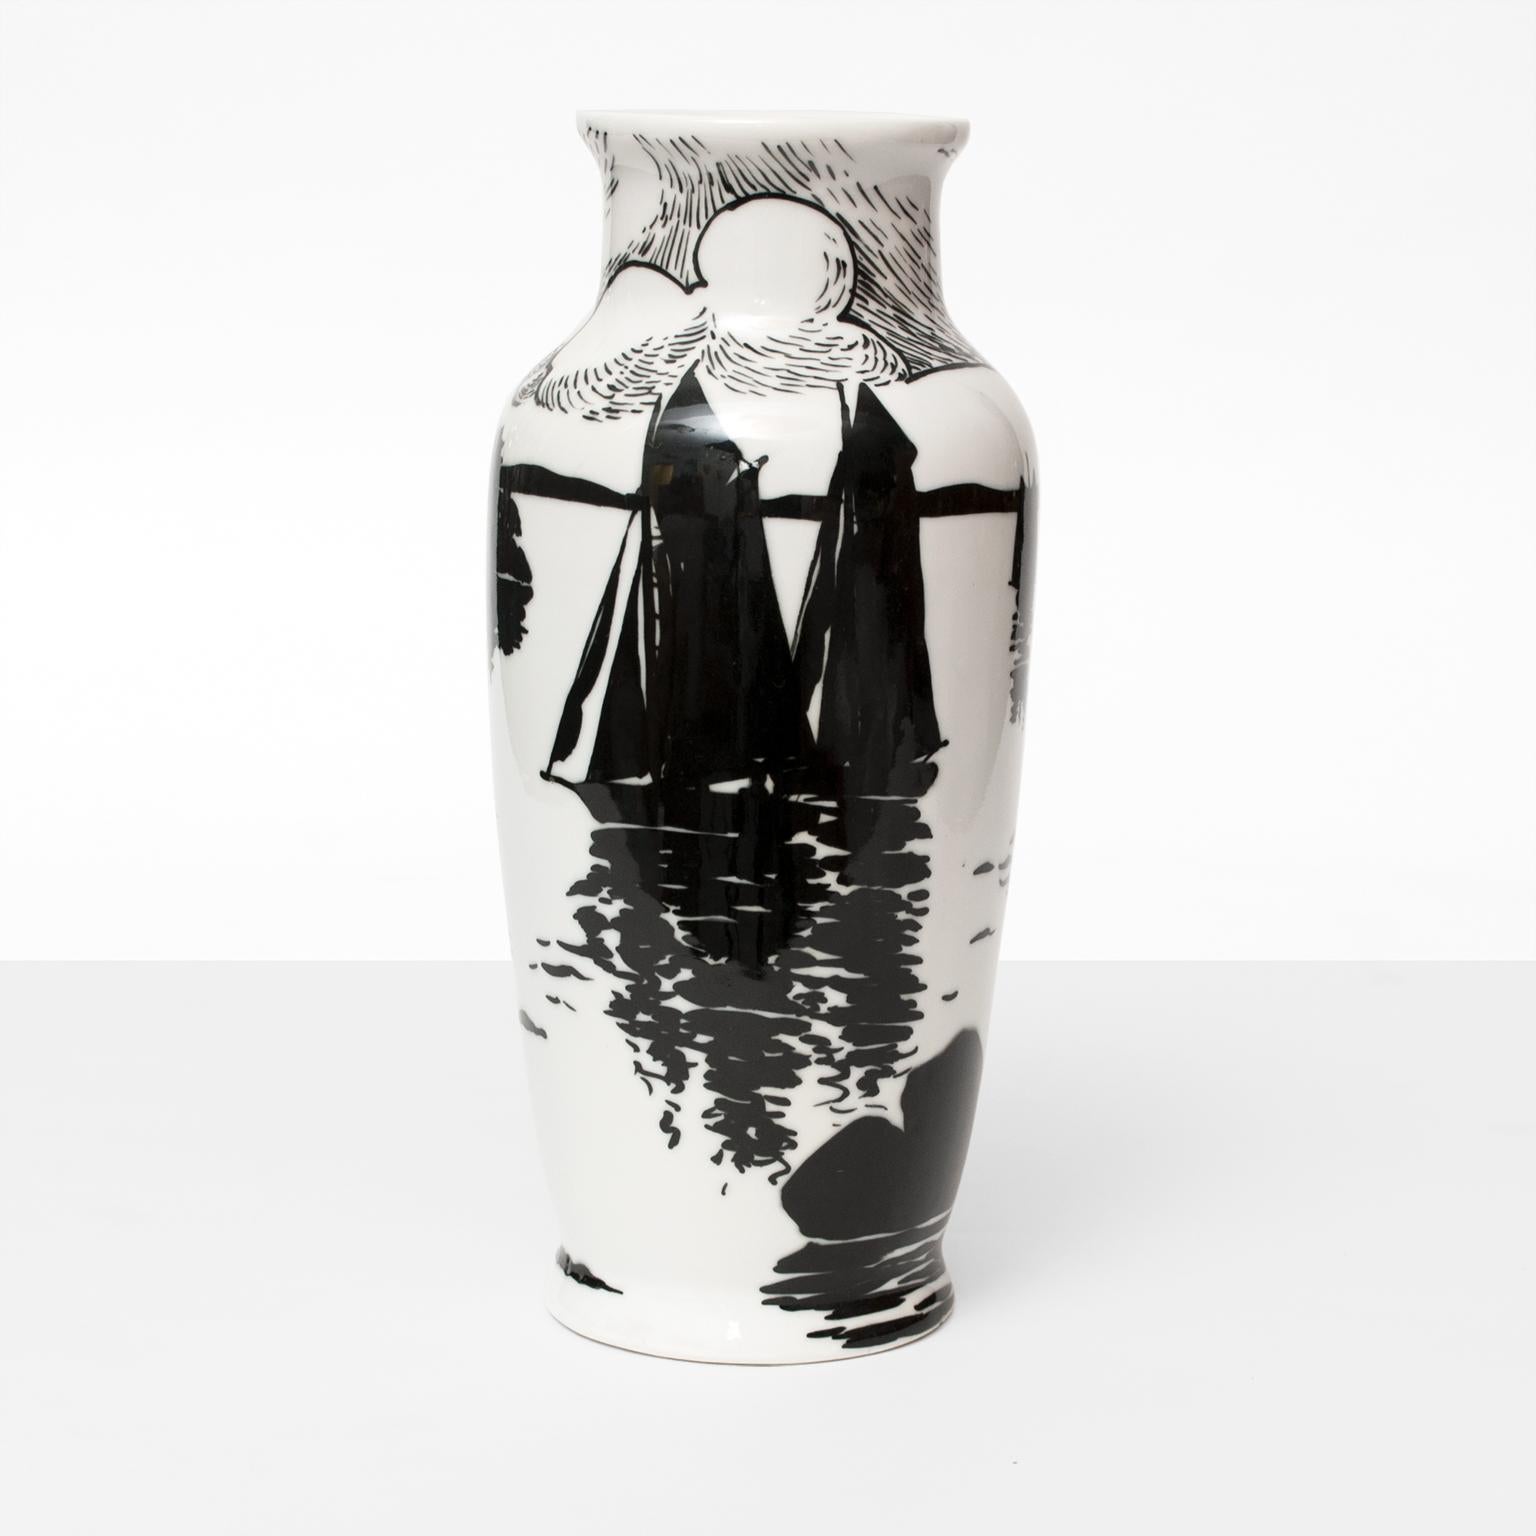 Swedish Art Deco hand decorated porcelain vase depicting sail boats on water, landscape and a sky with clouds all in black and white. Designed by Algot Ericsson, circa 1915-1919 at A.L.P. Measures: height 12.5